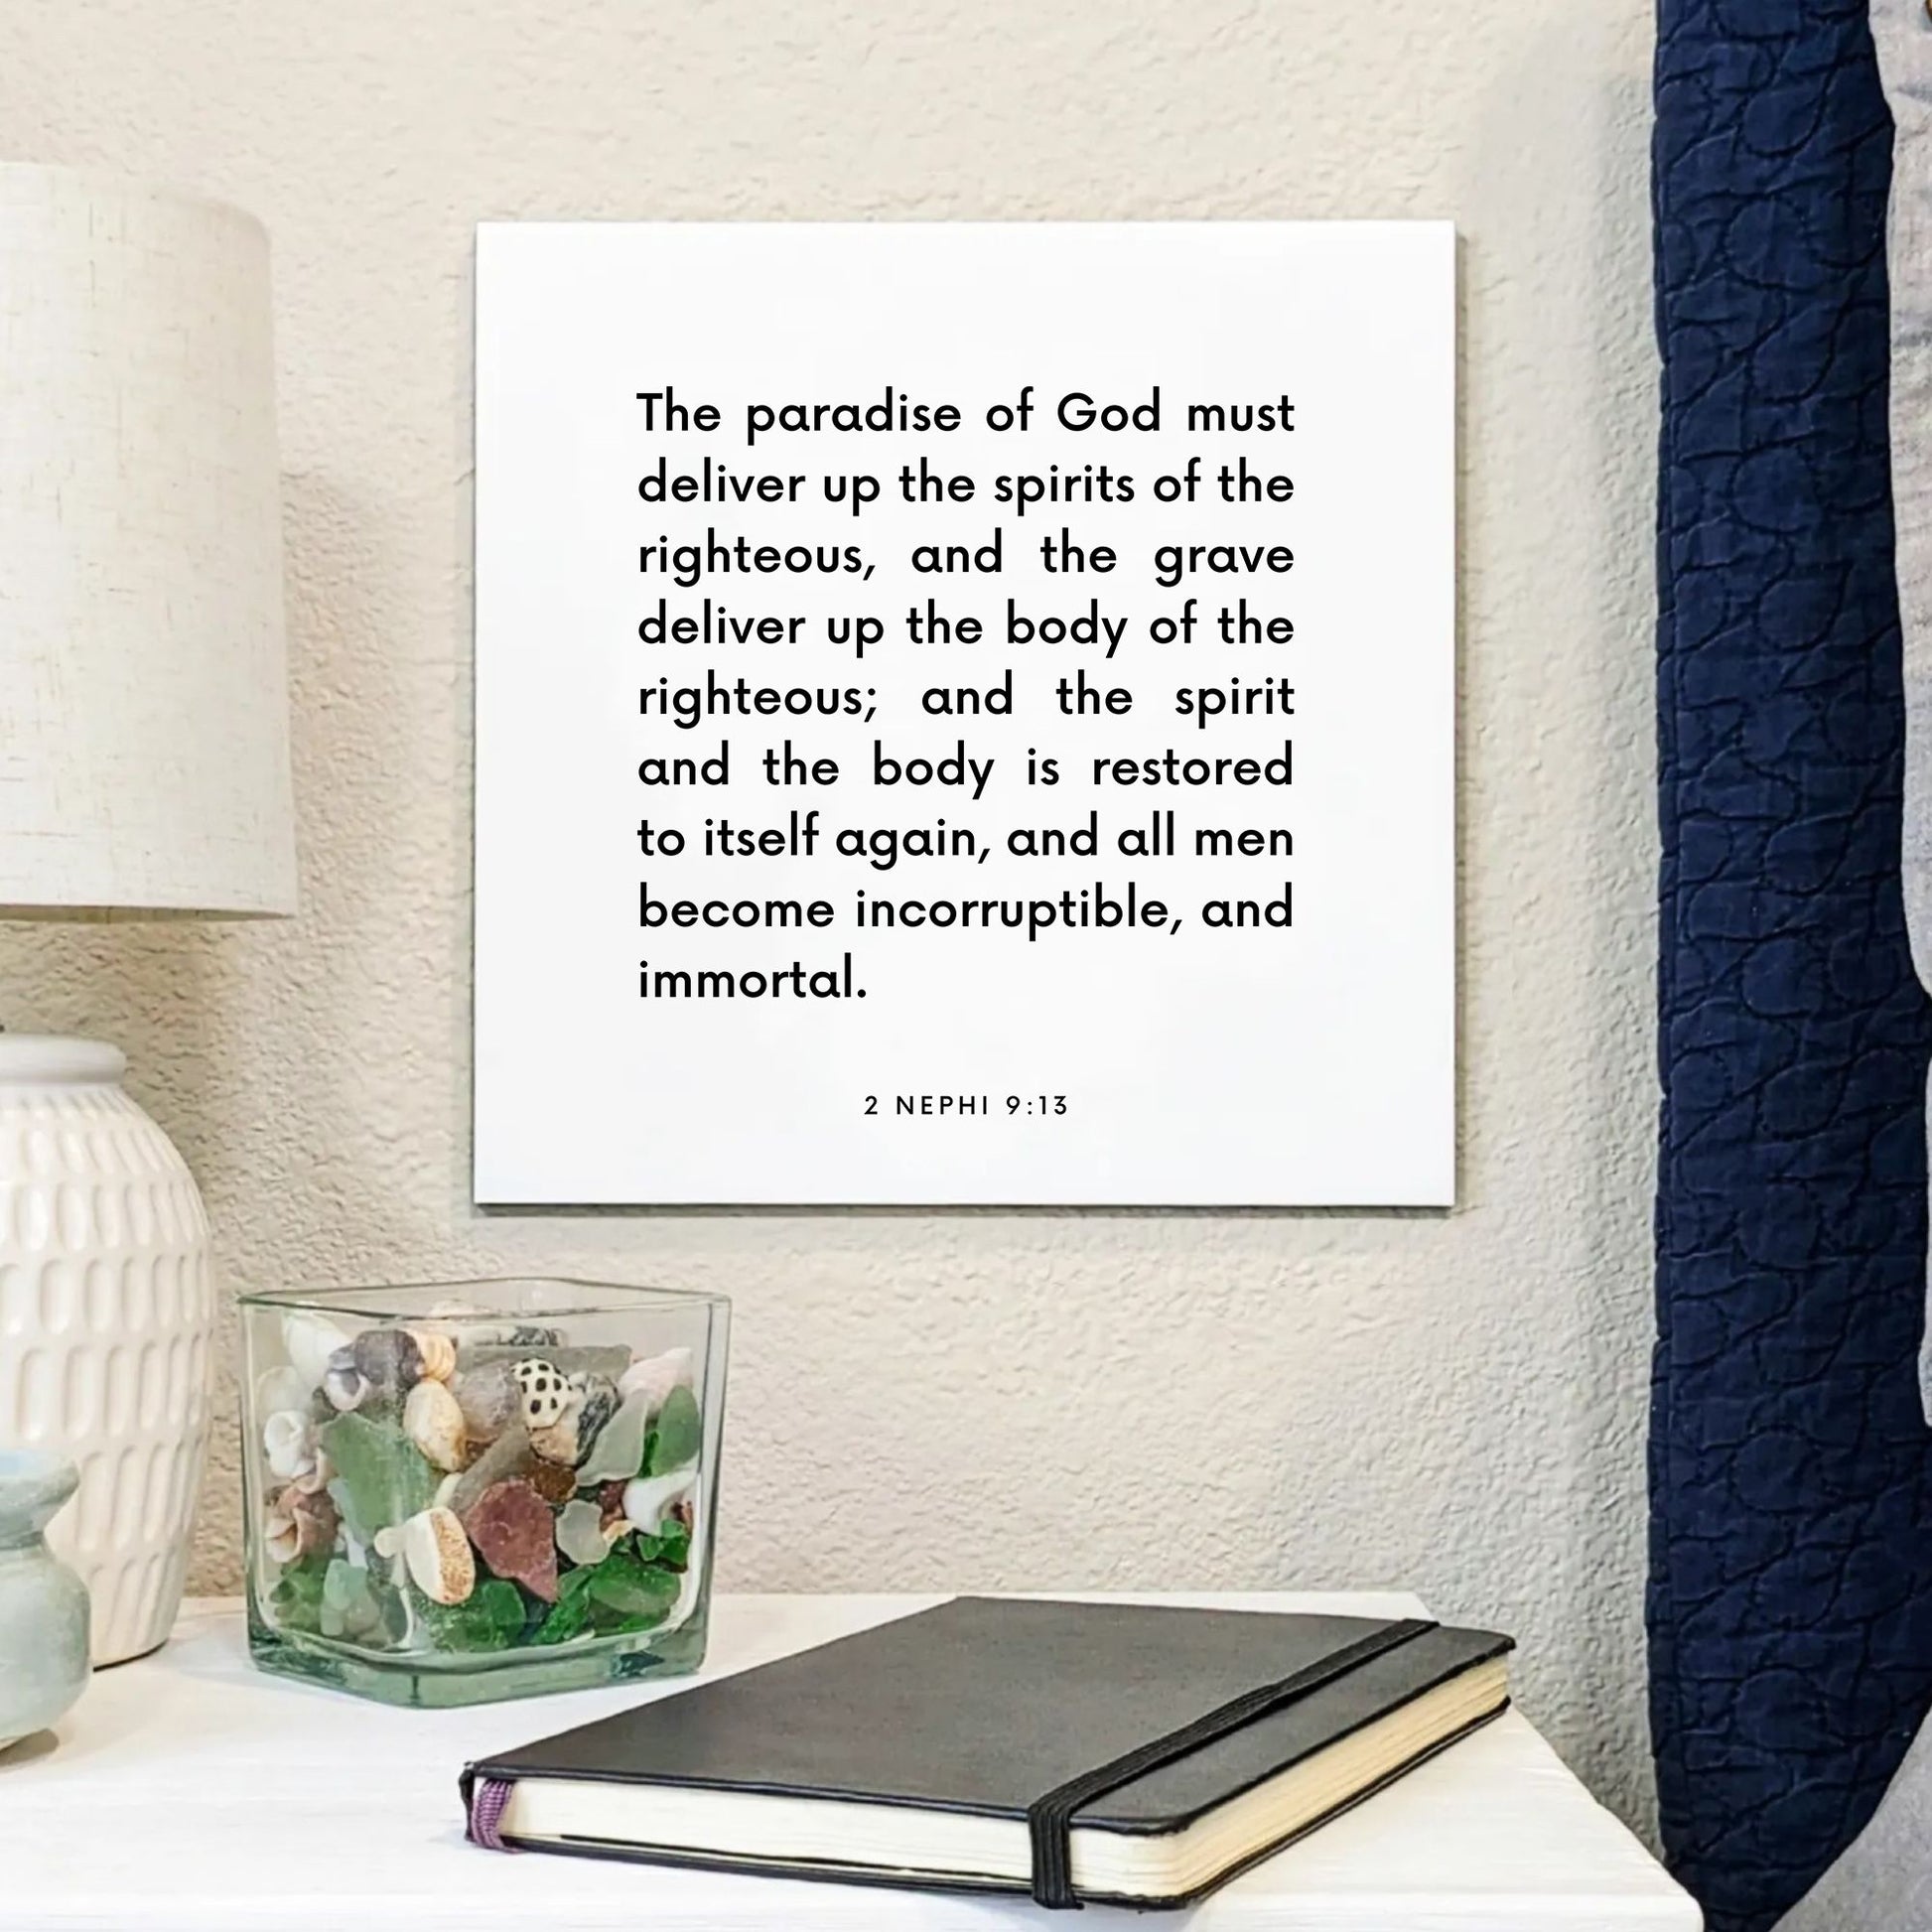 Bedside mouting of the scripture tile for 2 Nephi 9:13 - "The spirit and the body is restored to itself again"